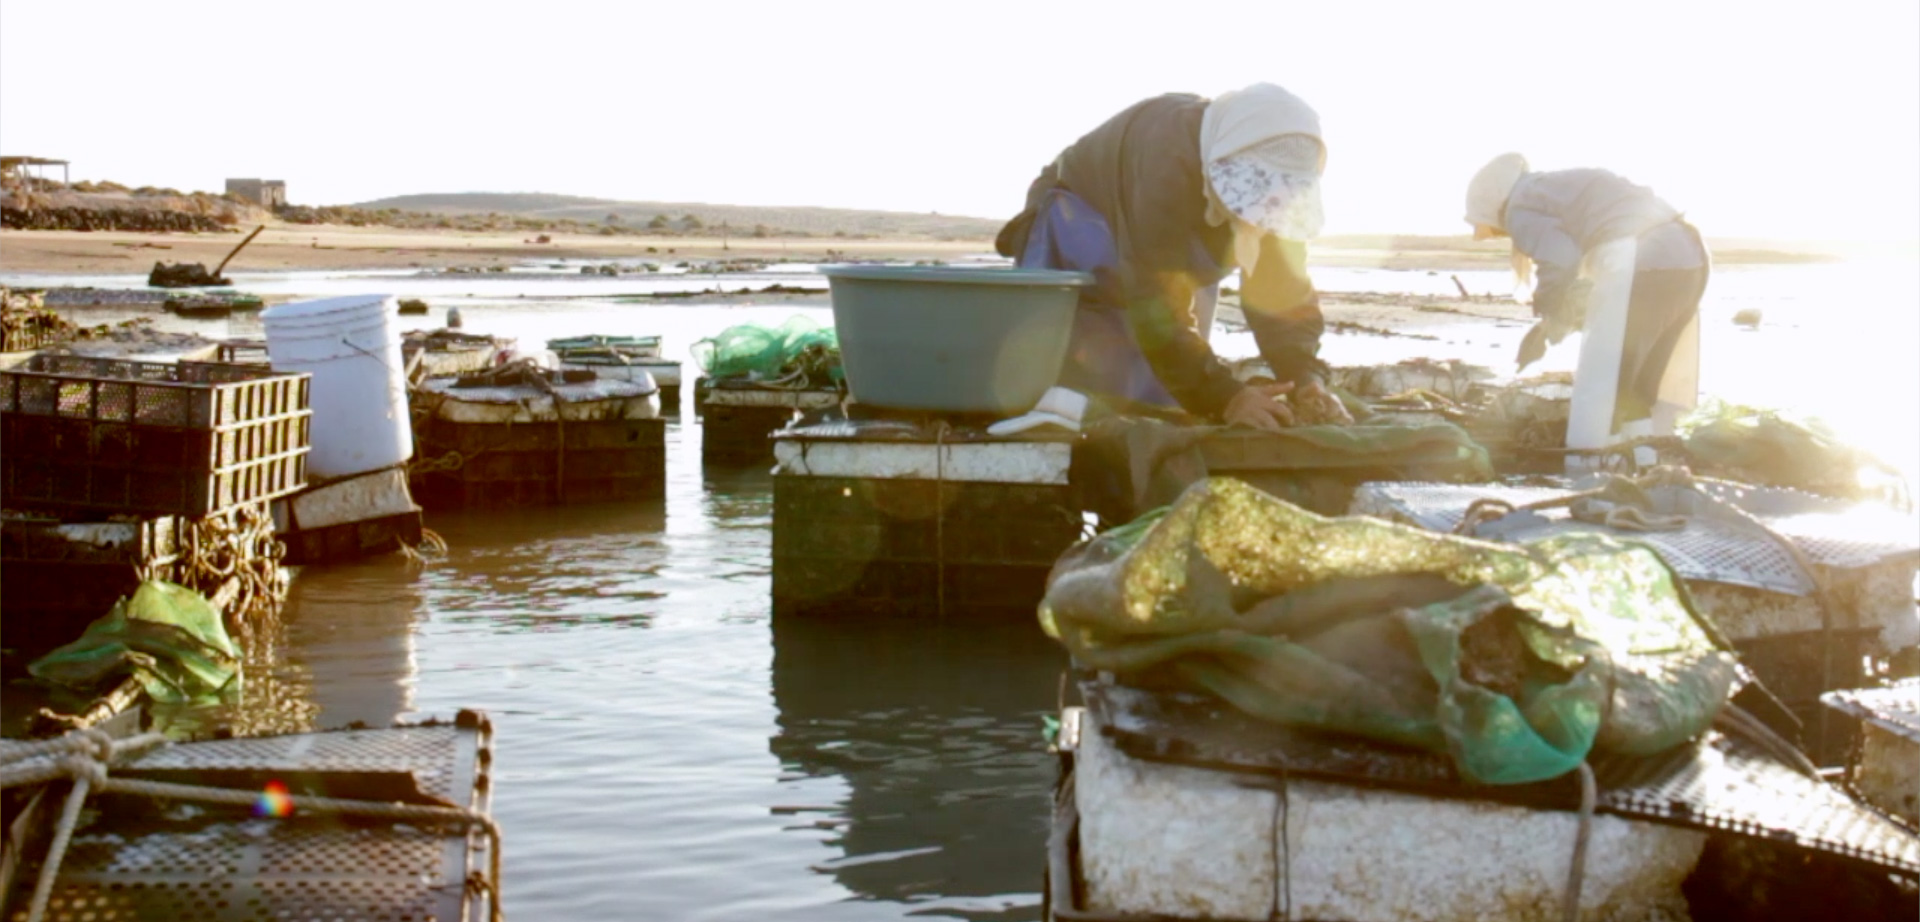 woman farming oysters in Mexico